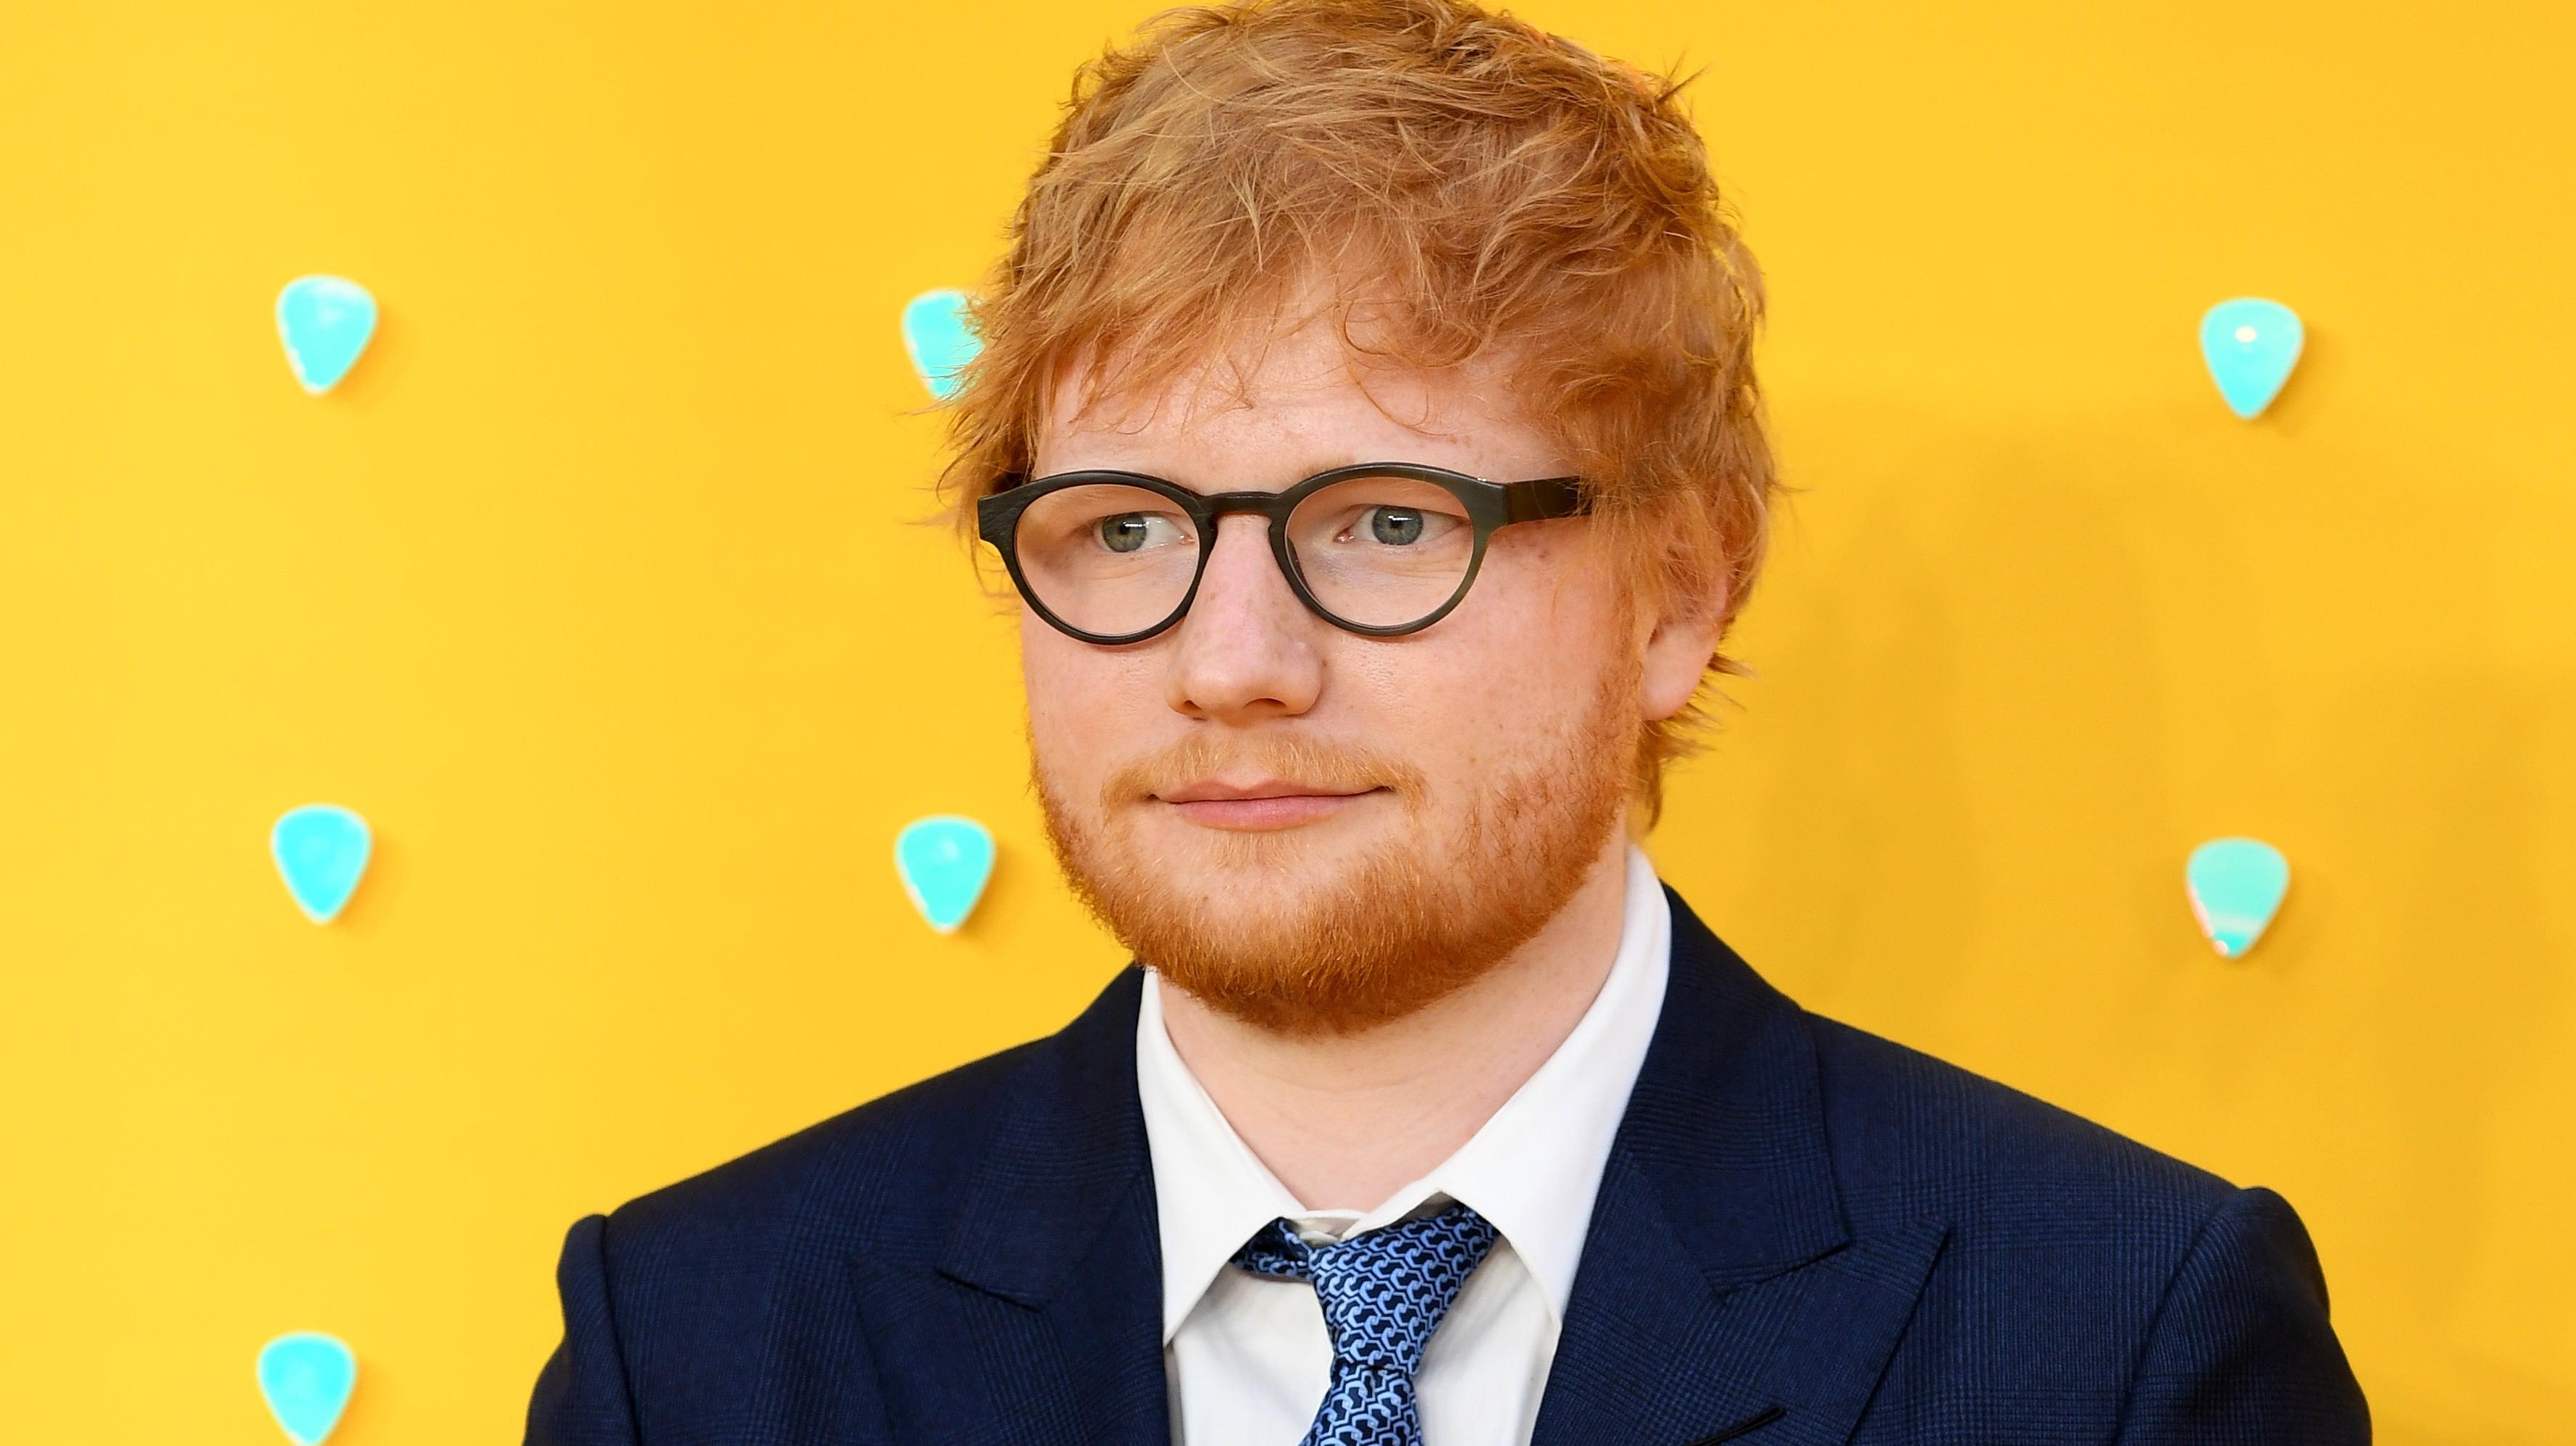 Ed Sheeran is getting a week-long residency on The Late Late Show With James Corden